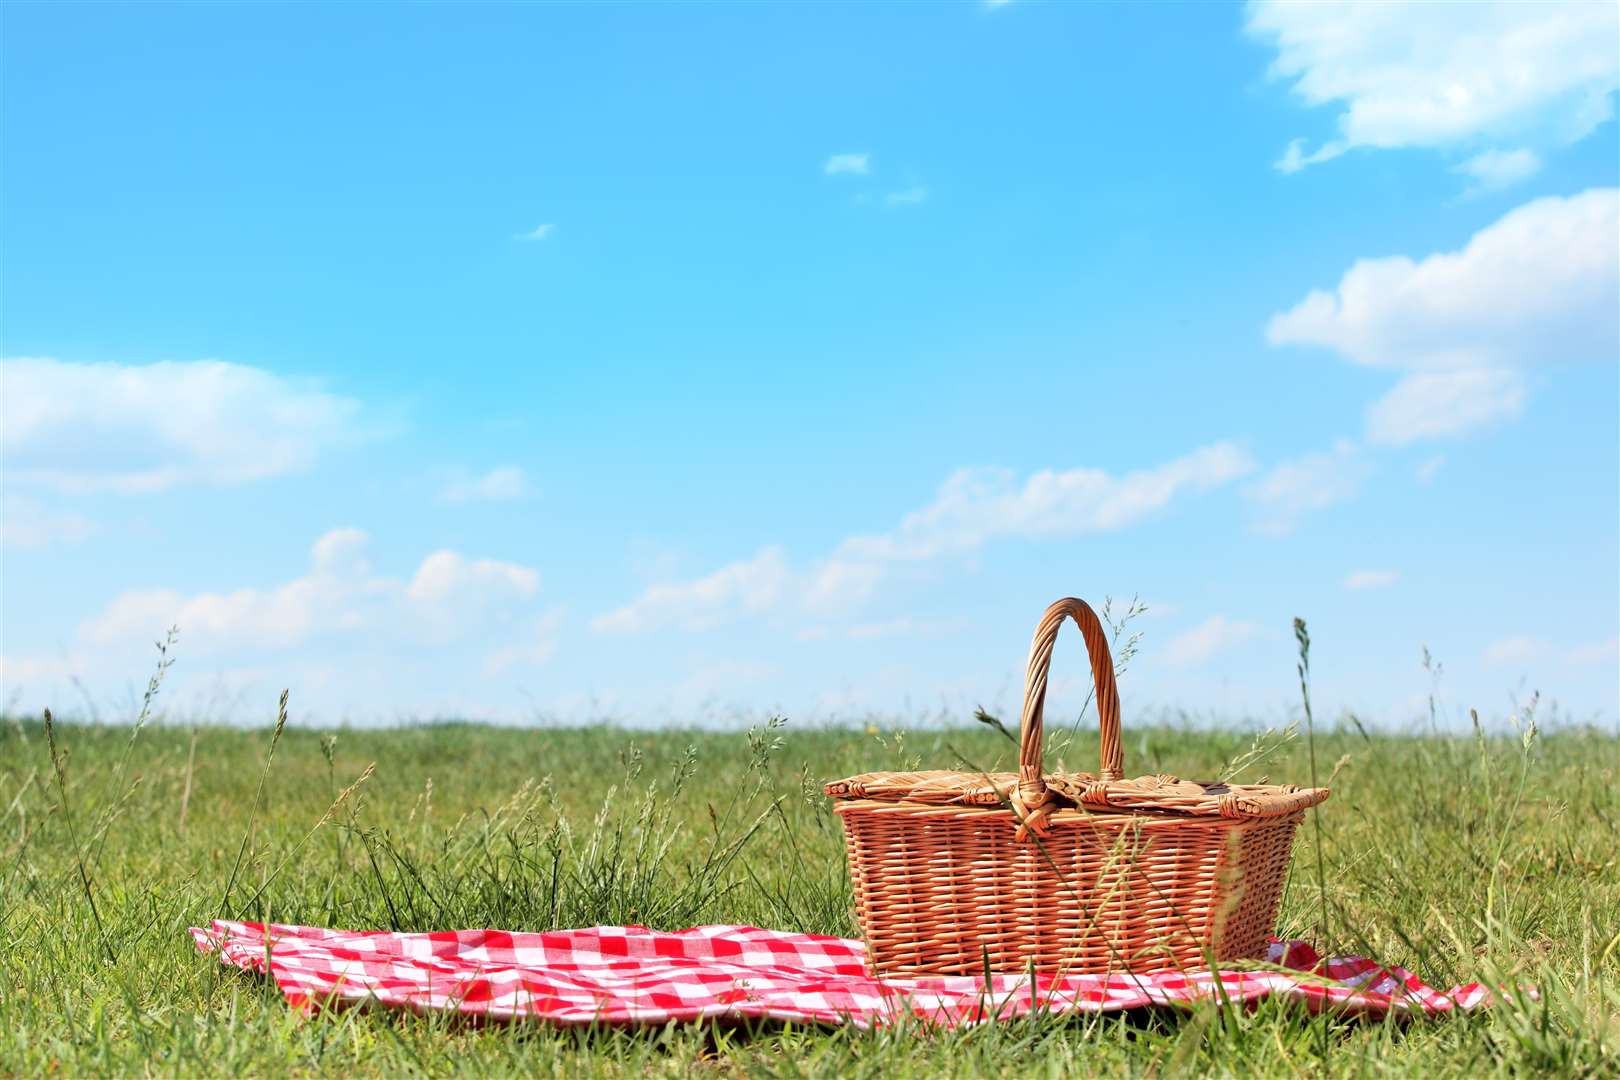 With a hot week of weather ahead it's an ideal time to picnic with the kids